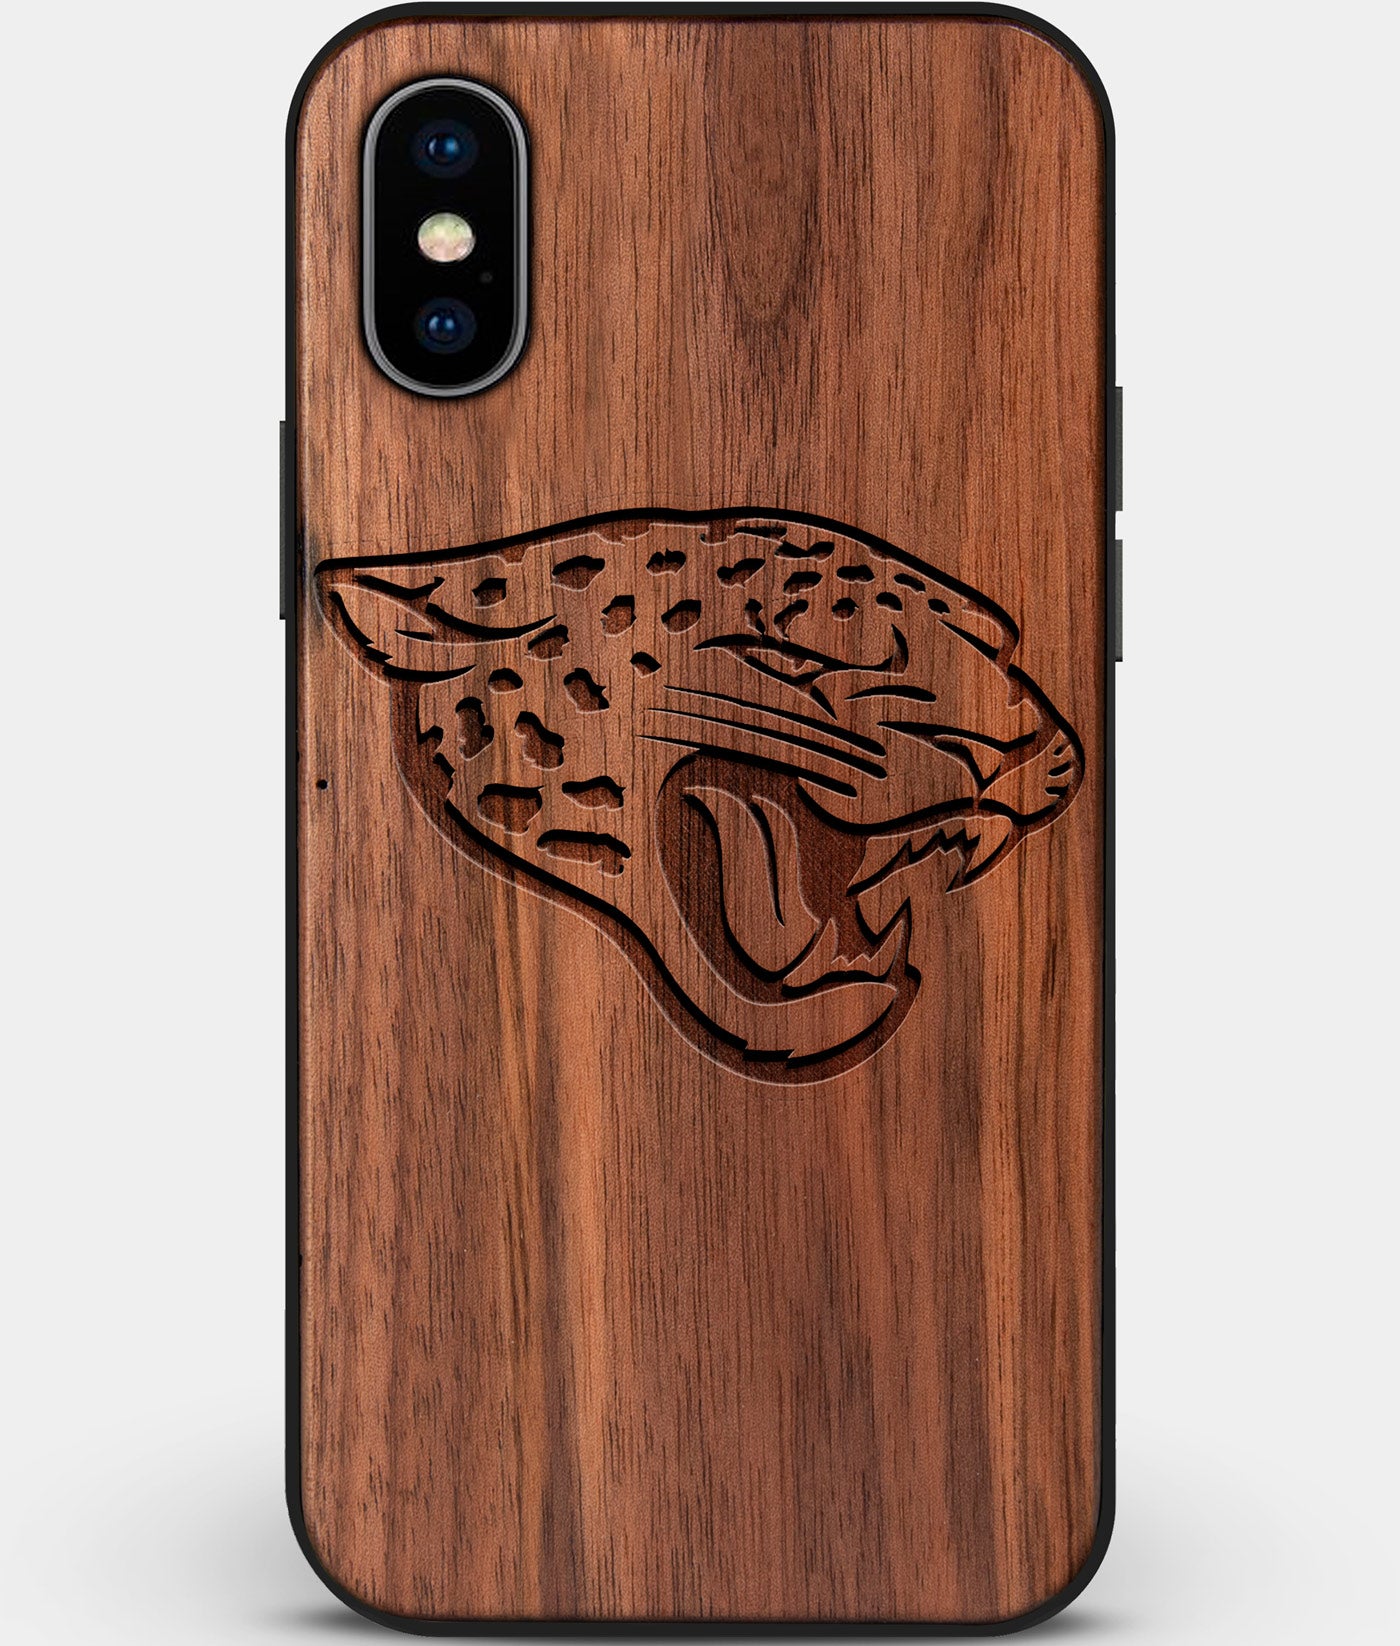 Custom Carved Wood Jacksonville Jaguars iPhone X/XS Case | Personalized Walnut Wood Jacksonville Jaguars Cover, Birthday Gift, Gifts For Him, Monogrammed Gift For Fan | by Engraved In Nature